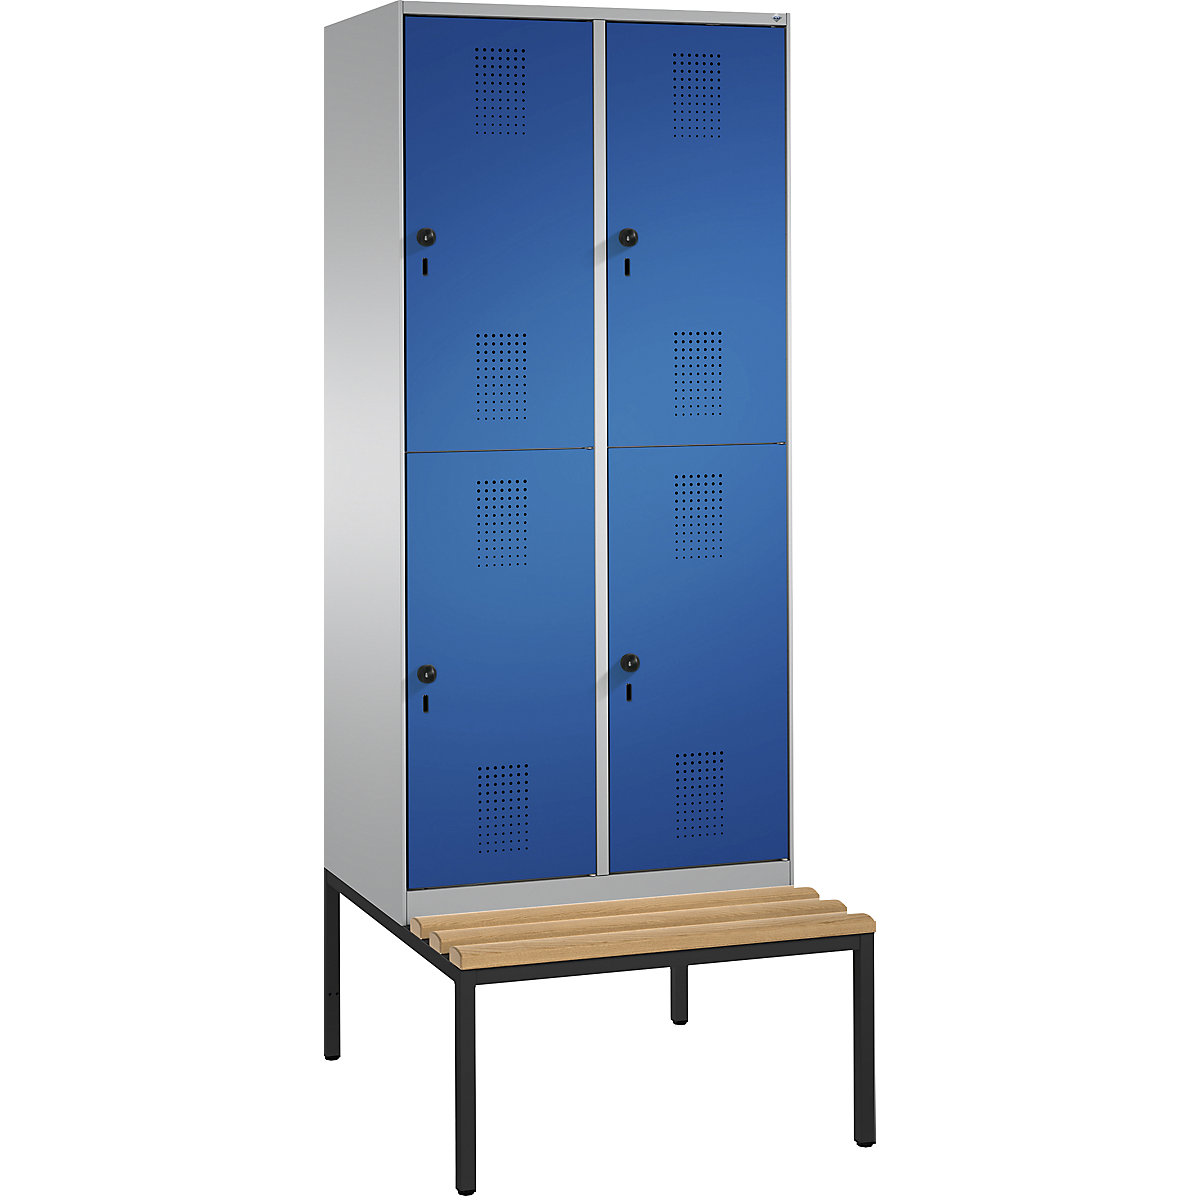 EVOLO cloakroom locker, double tier, with bench – C+P, 2 compartments, 2 shelf compartments each, compartment width 400 mm, white aluminium / gentian blue-7